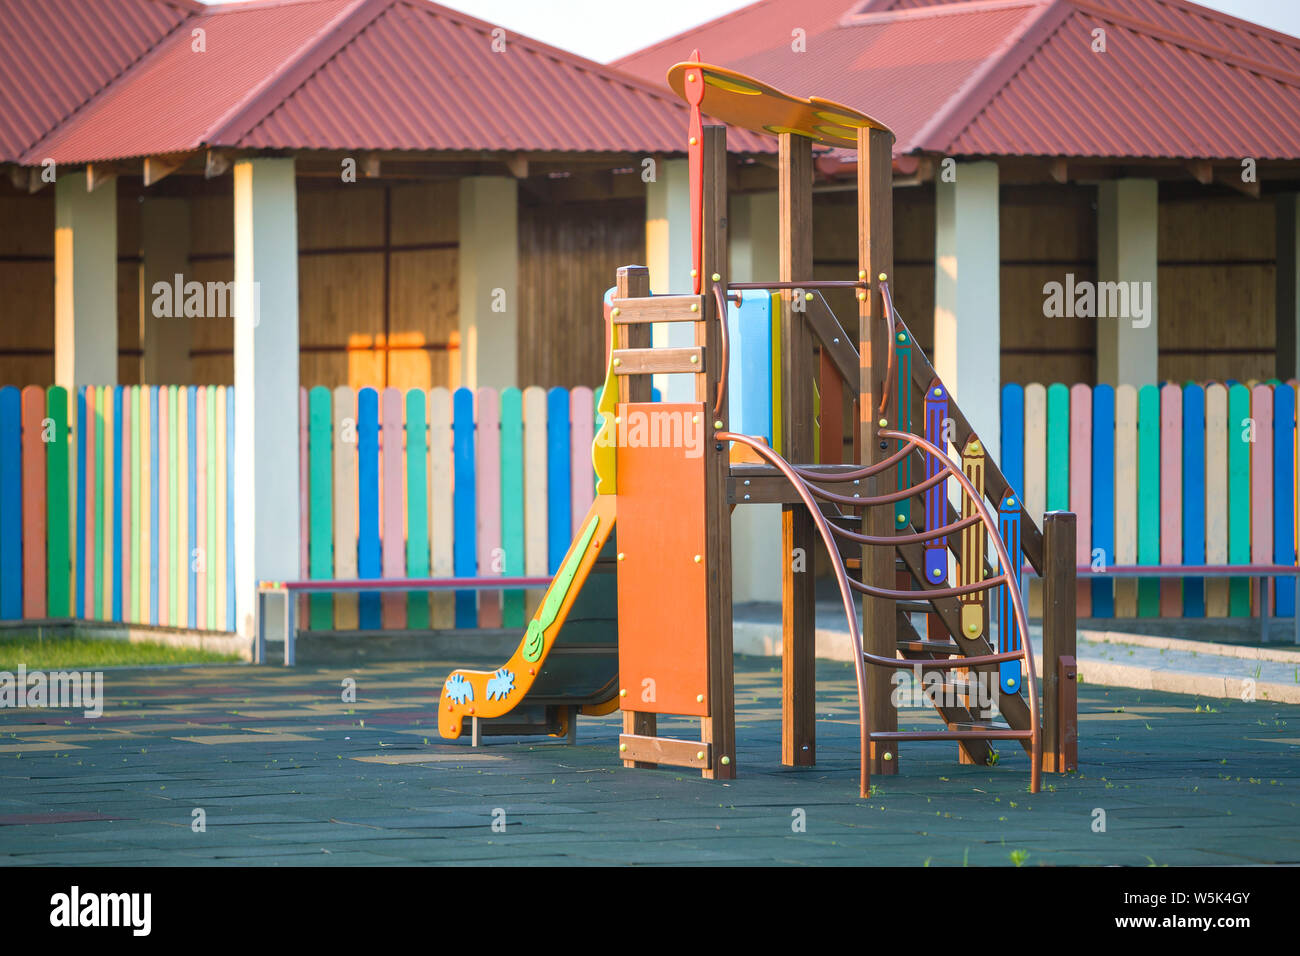 Nursery Playground With Colorful Slides On Soft Rubber Flooring